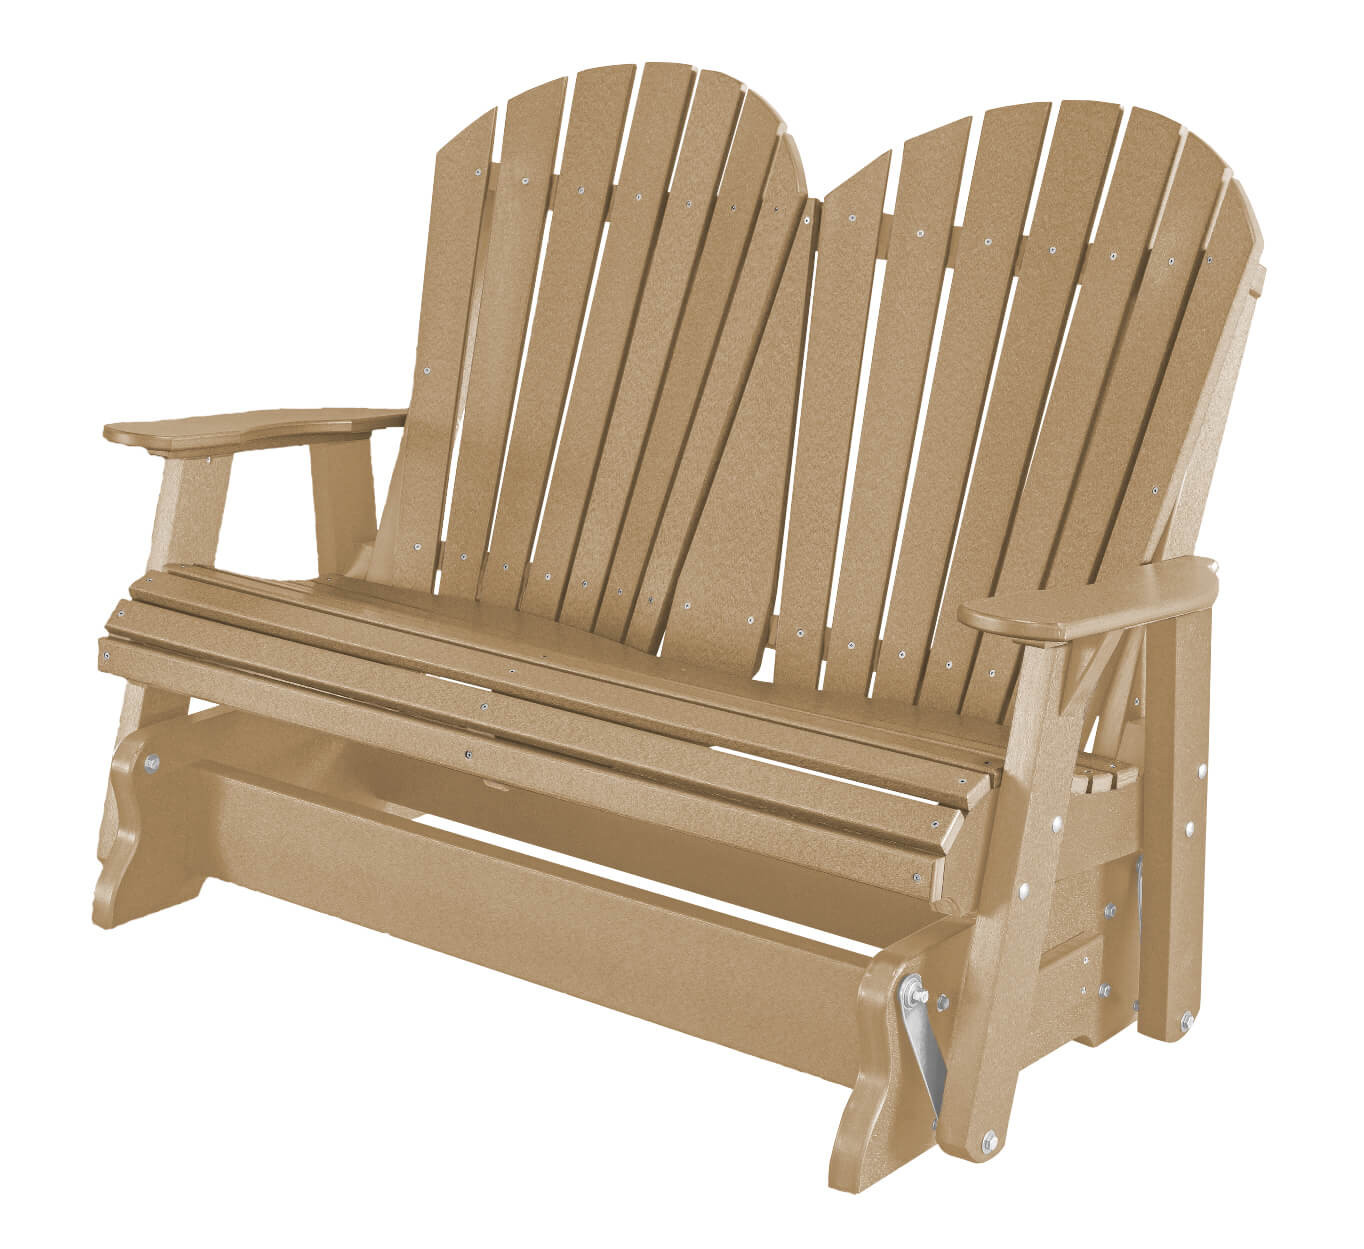 Weathered Wood Sidra Outdoor Double Glider